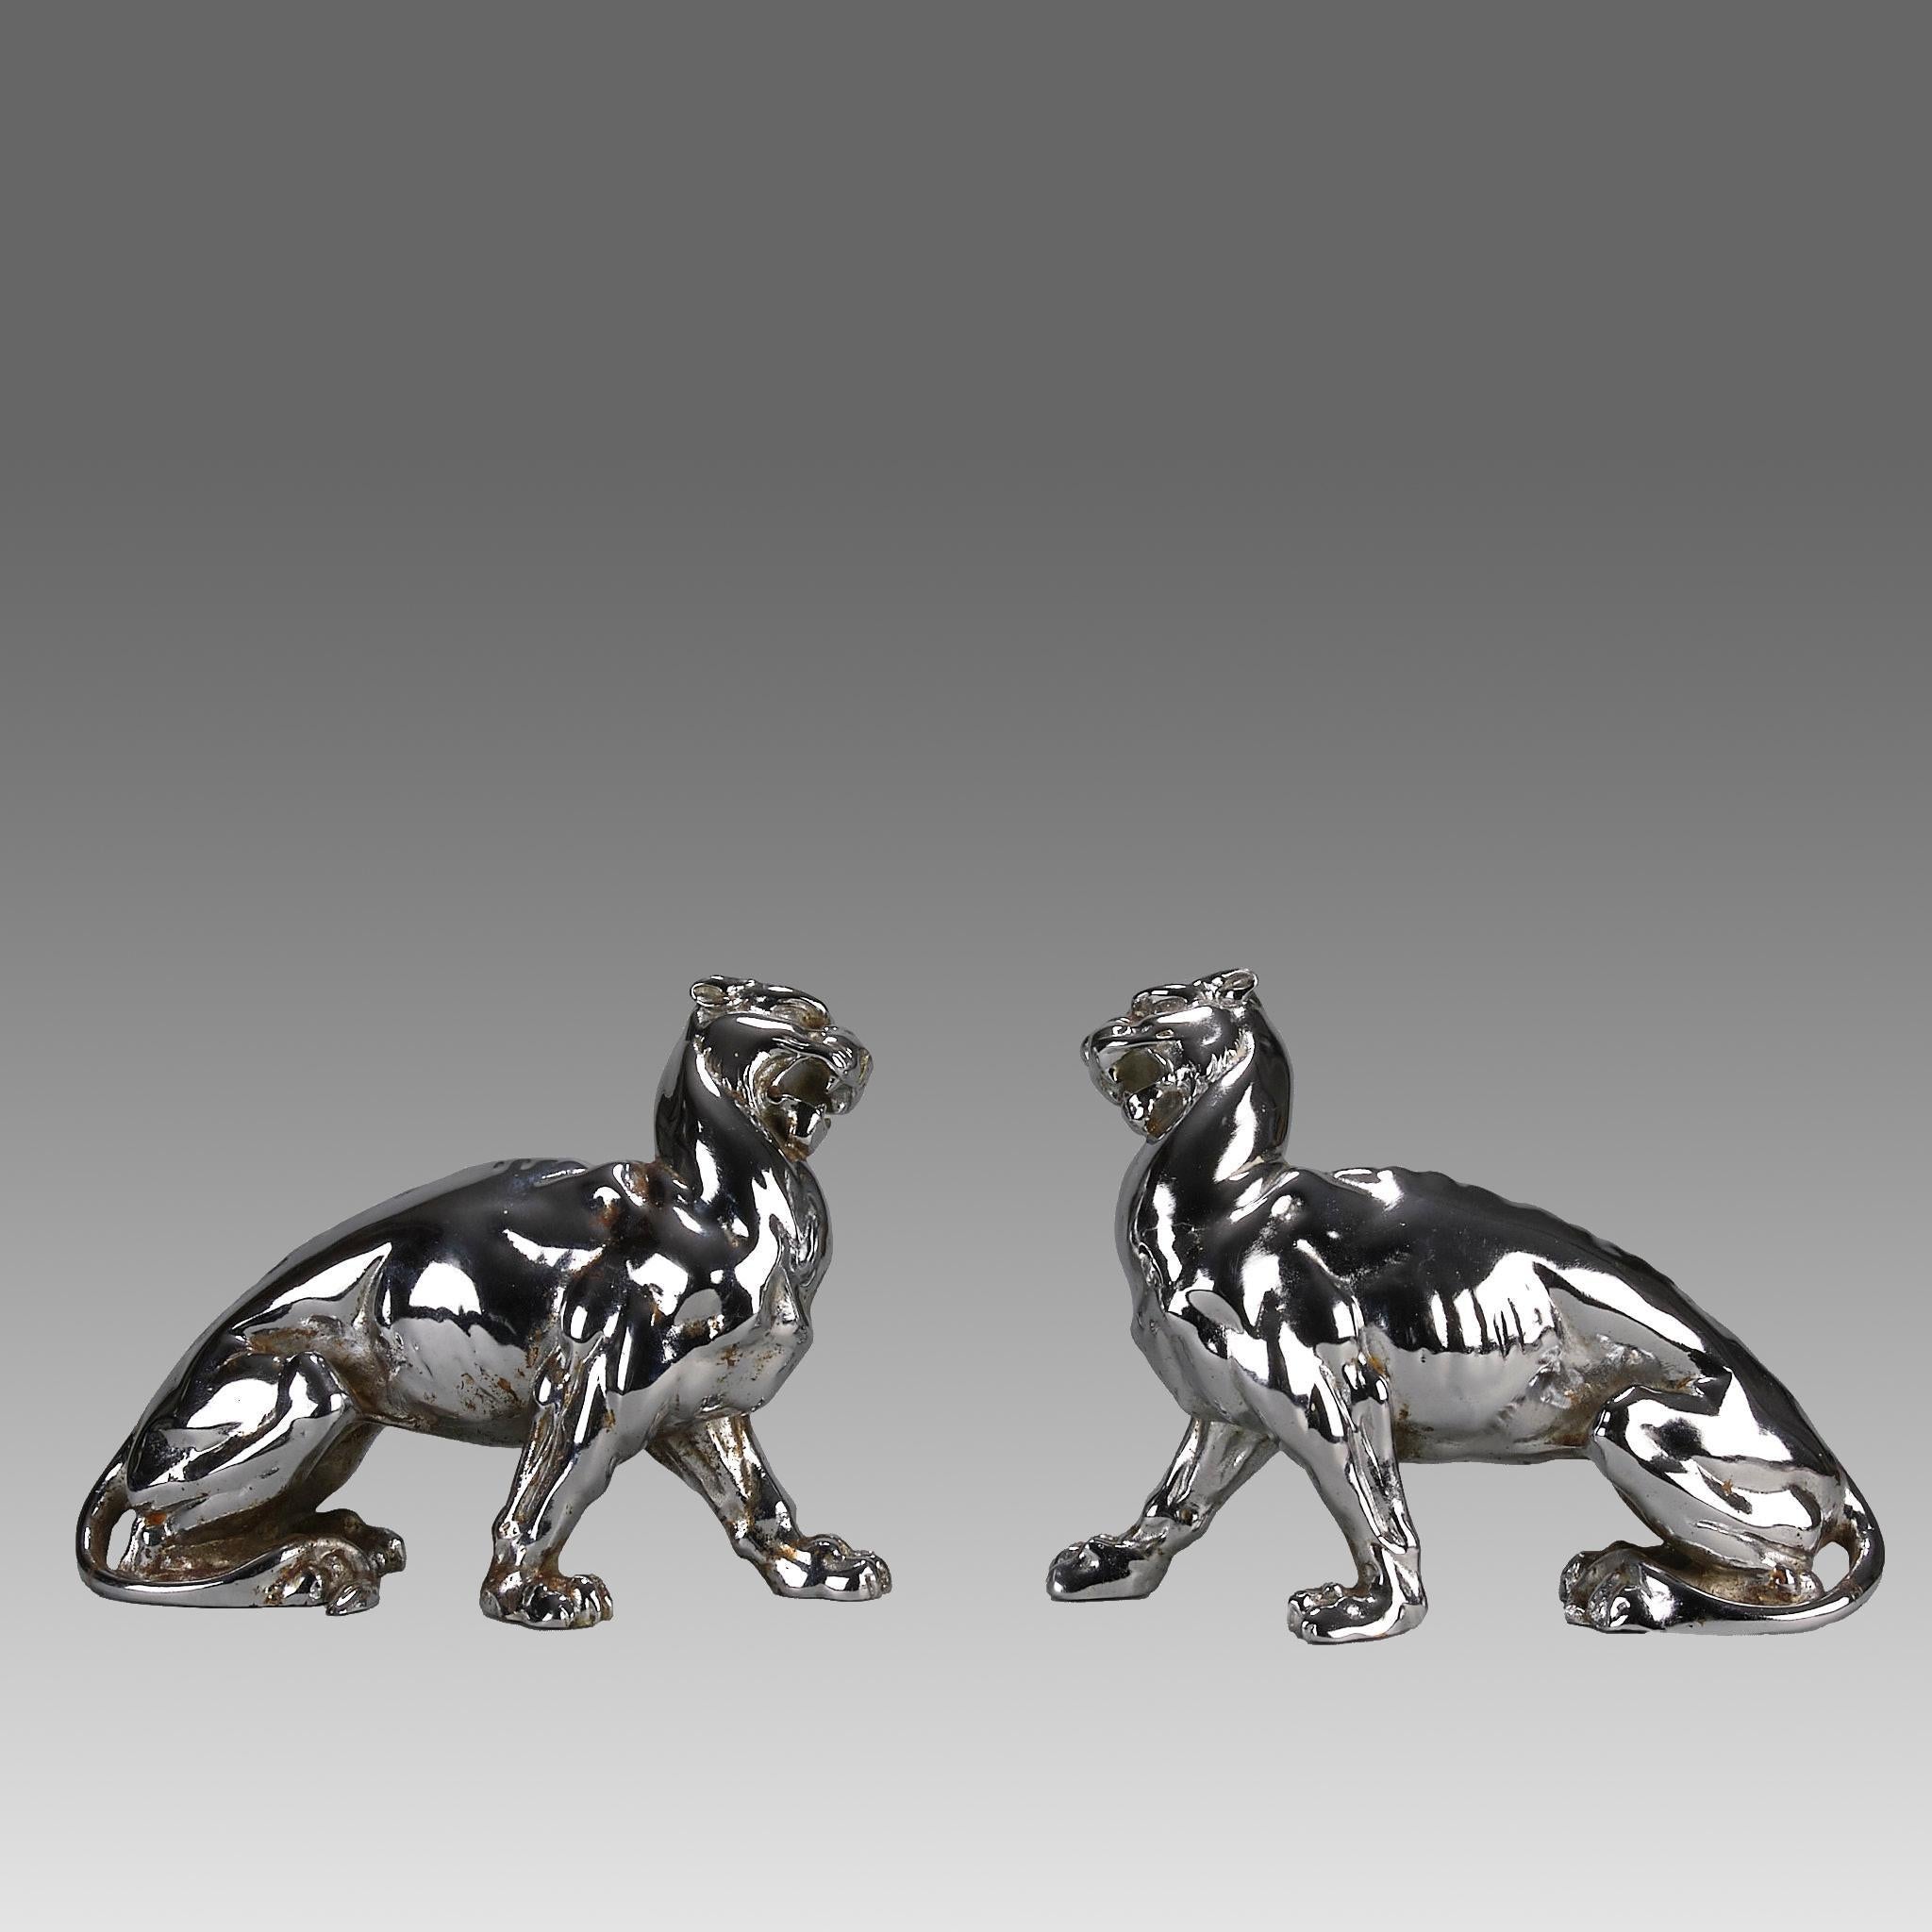 A striking pair of early 20th Century chromed cast iron sculptures modelled as two turning panthers in mirroring poses, stamped with diamond lozenge export/import marks

ADDITIONAL INFORMATION
Height:                                      17